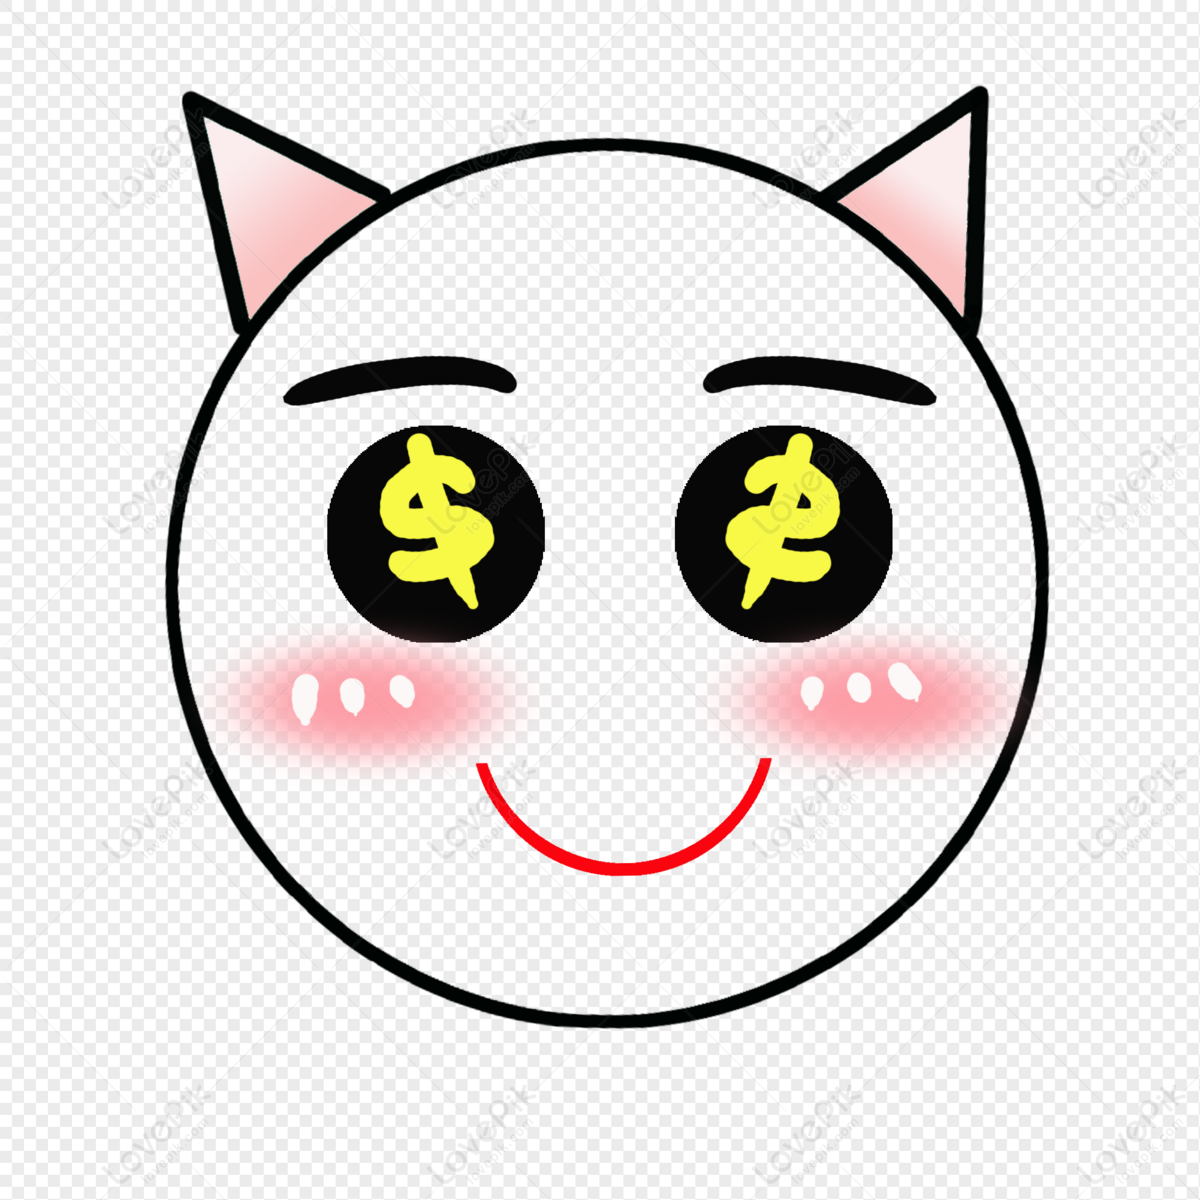 Emoticon PNG Hd Transparent Image And Clipart Image For Free ...